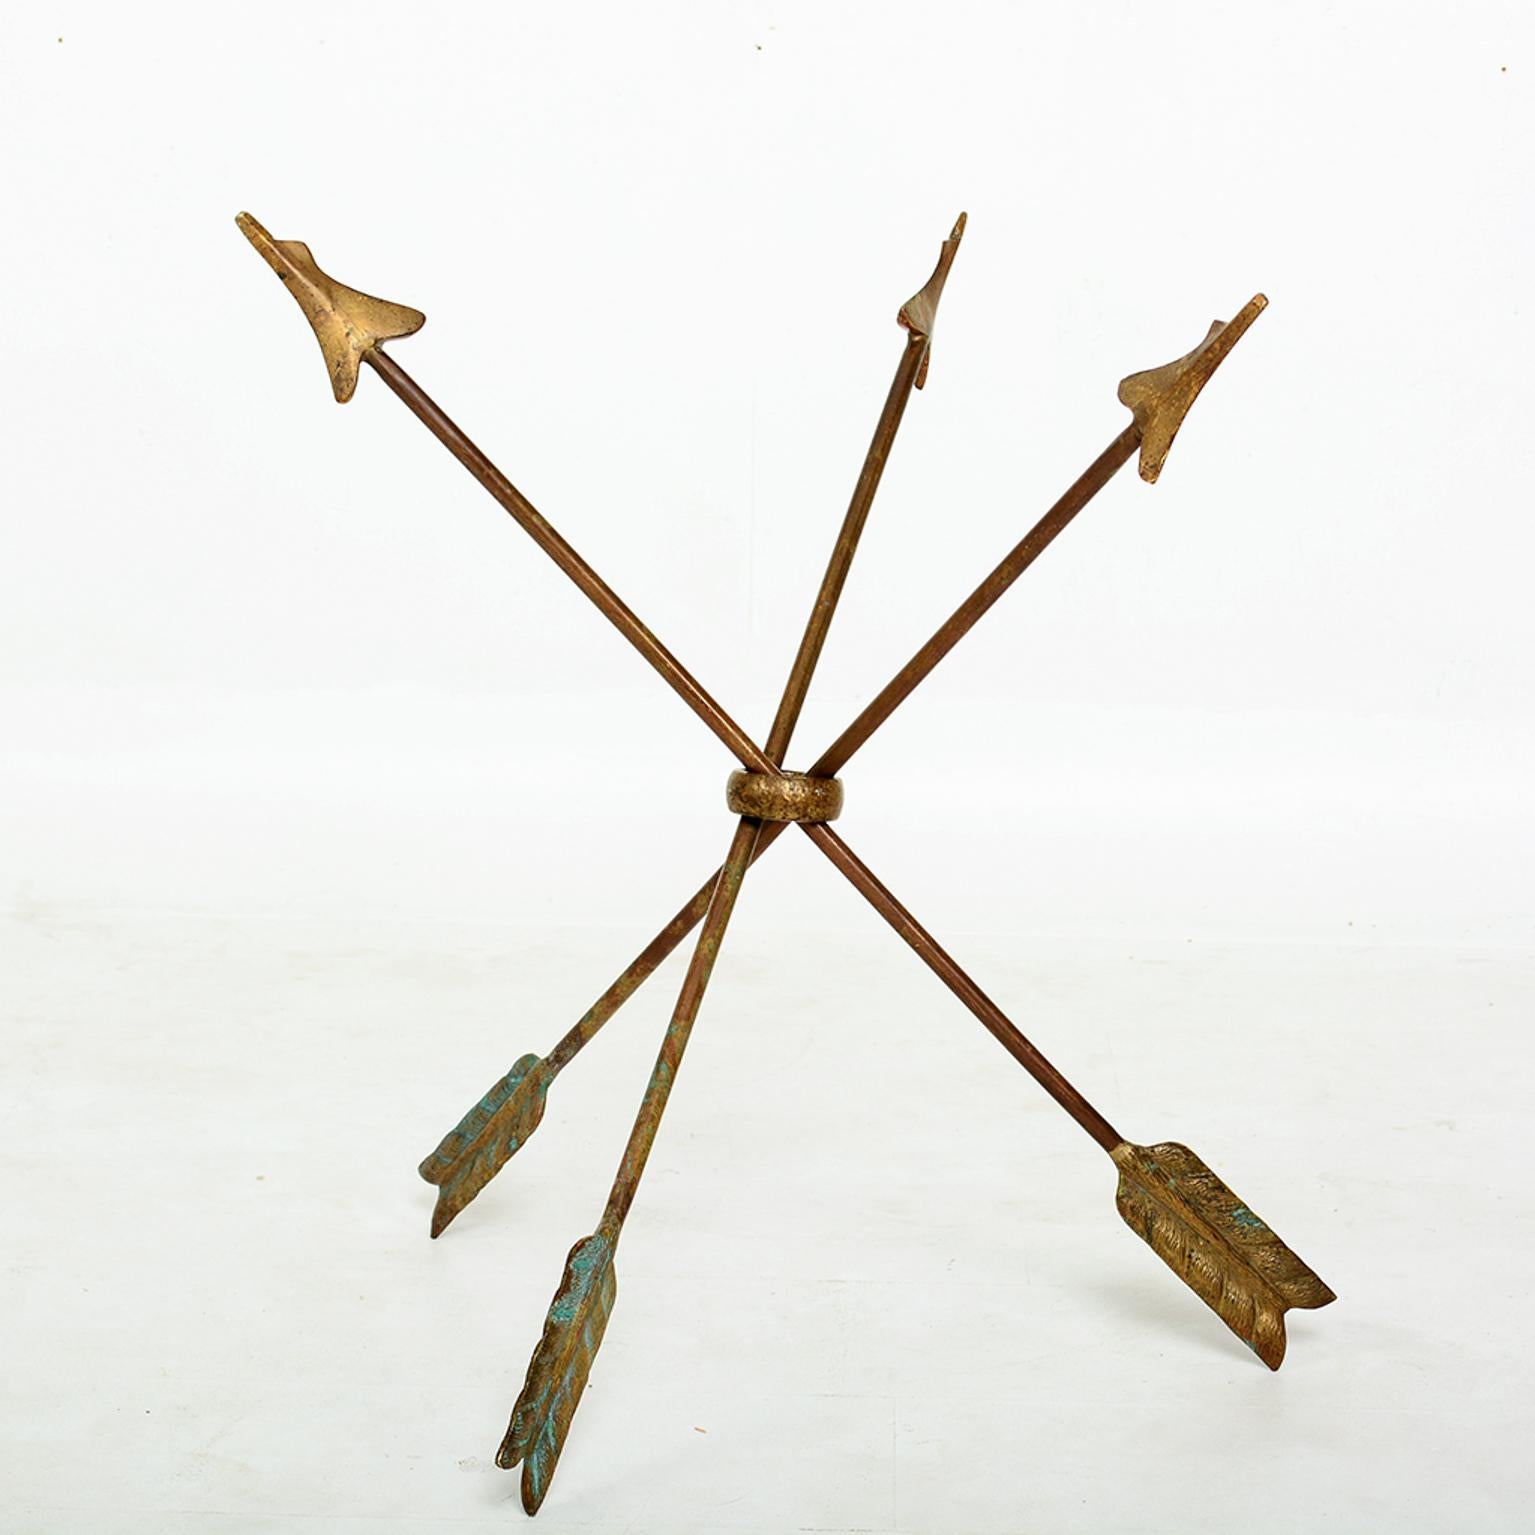 For your pleasure: Arturo Pani attribution on this glamorous Martini cocktail table, a tripod design of three solid bronze crossed arrows connected in the center by a solid brass ring.

Dimensions: 22